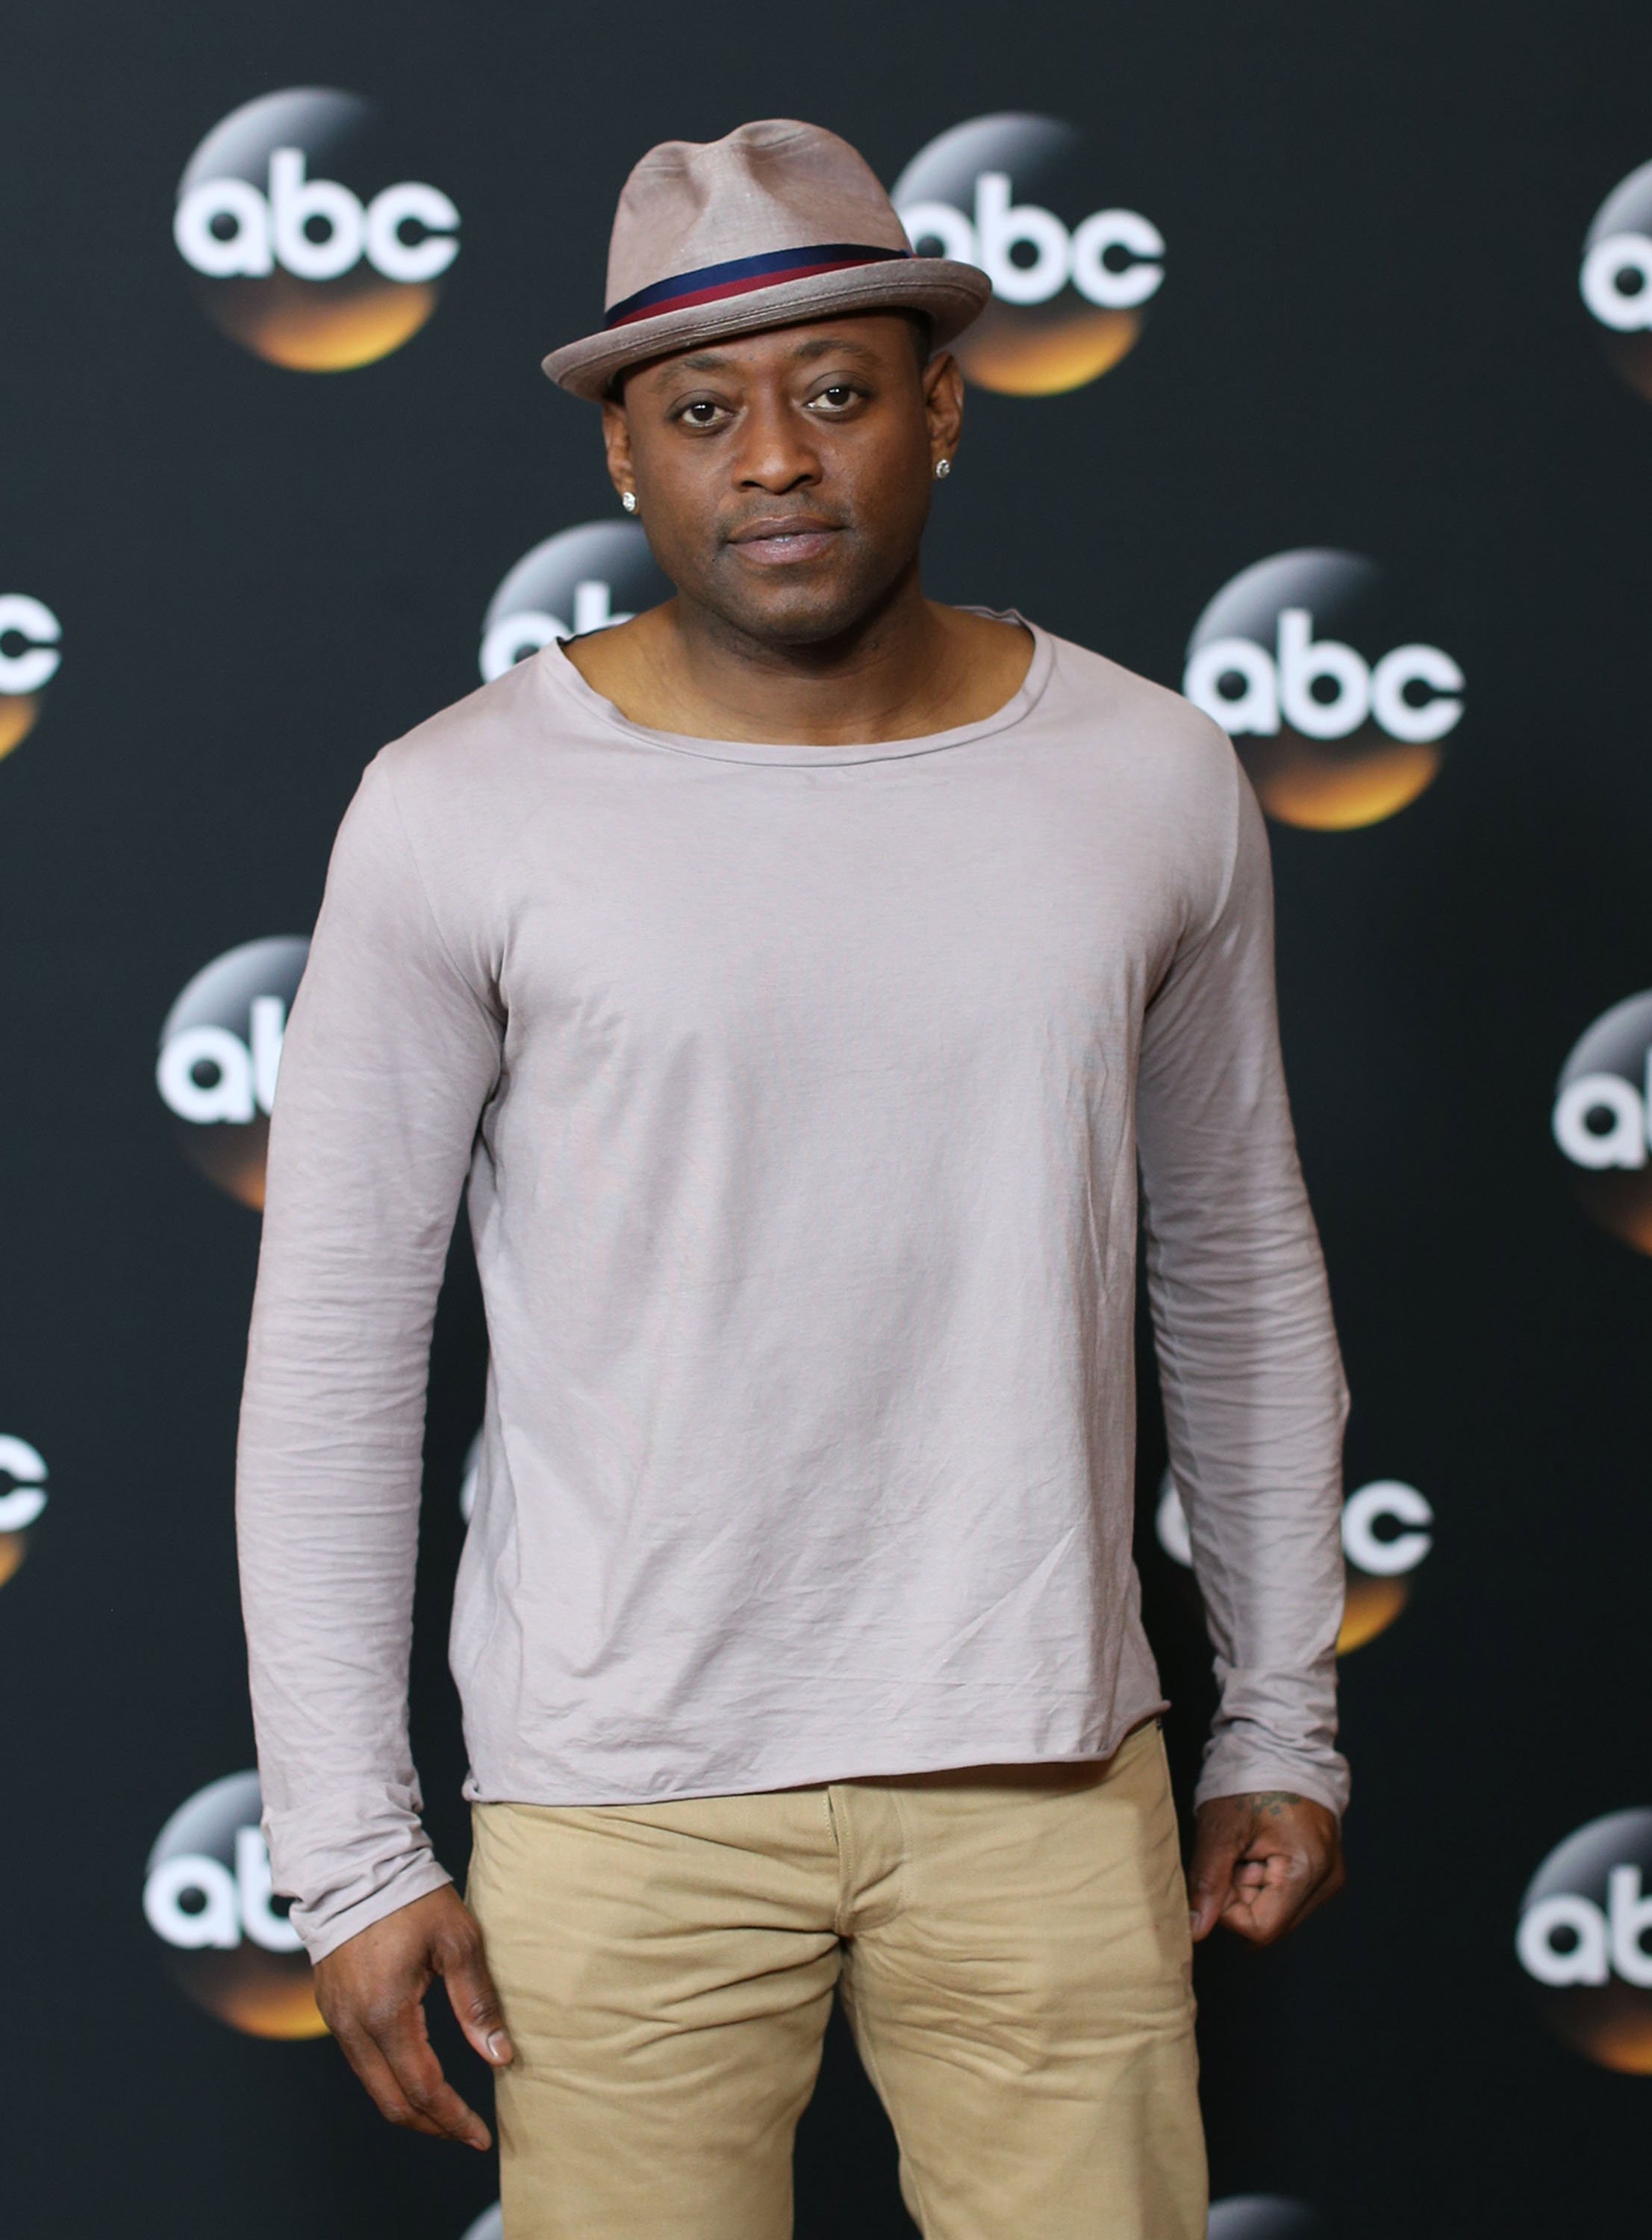 Omar Epps attends the Disney & ABC Television Group's TCA Summer Press Tour on July 15, 2014  | Photo: GettyImages